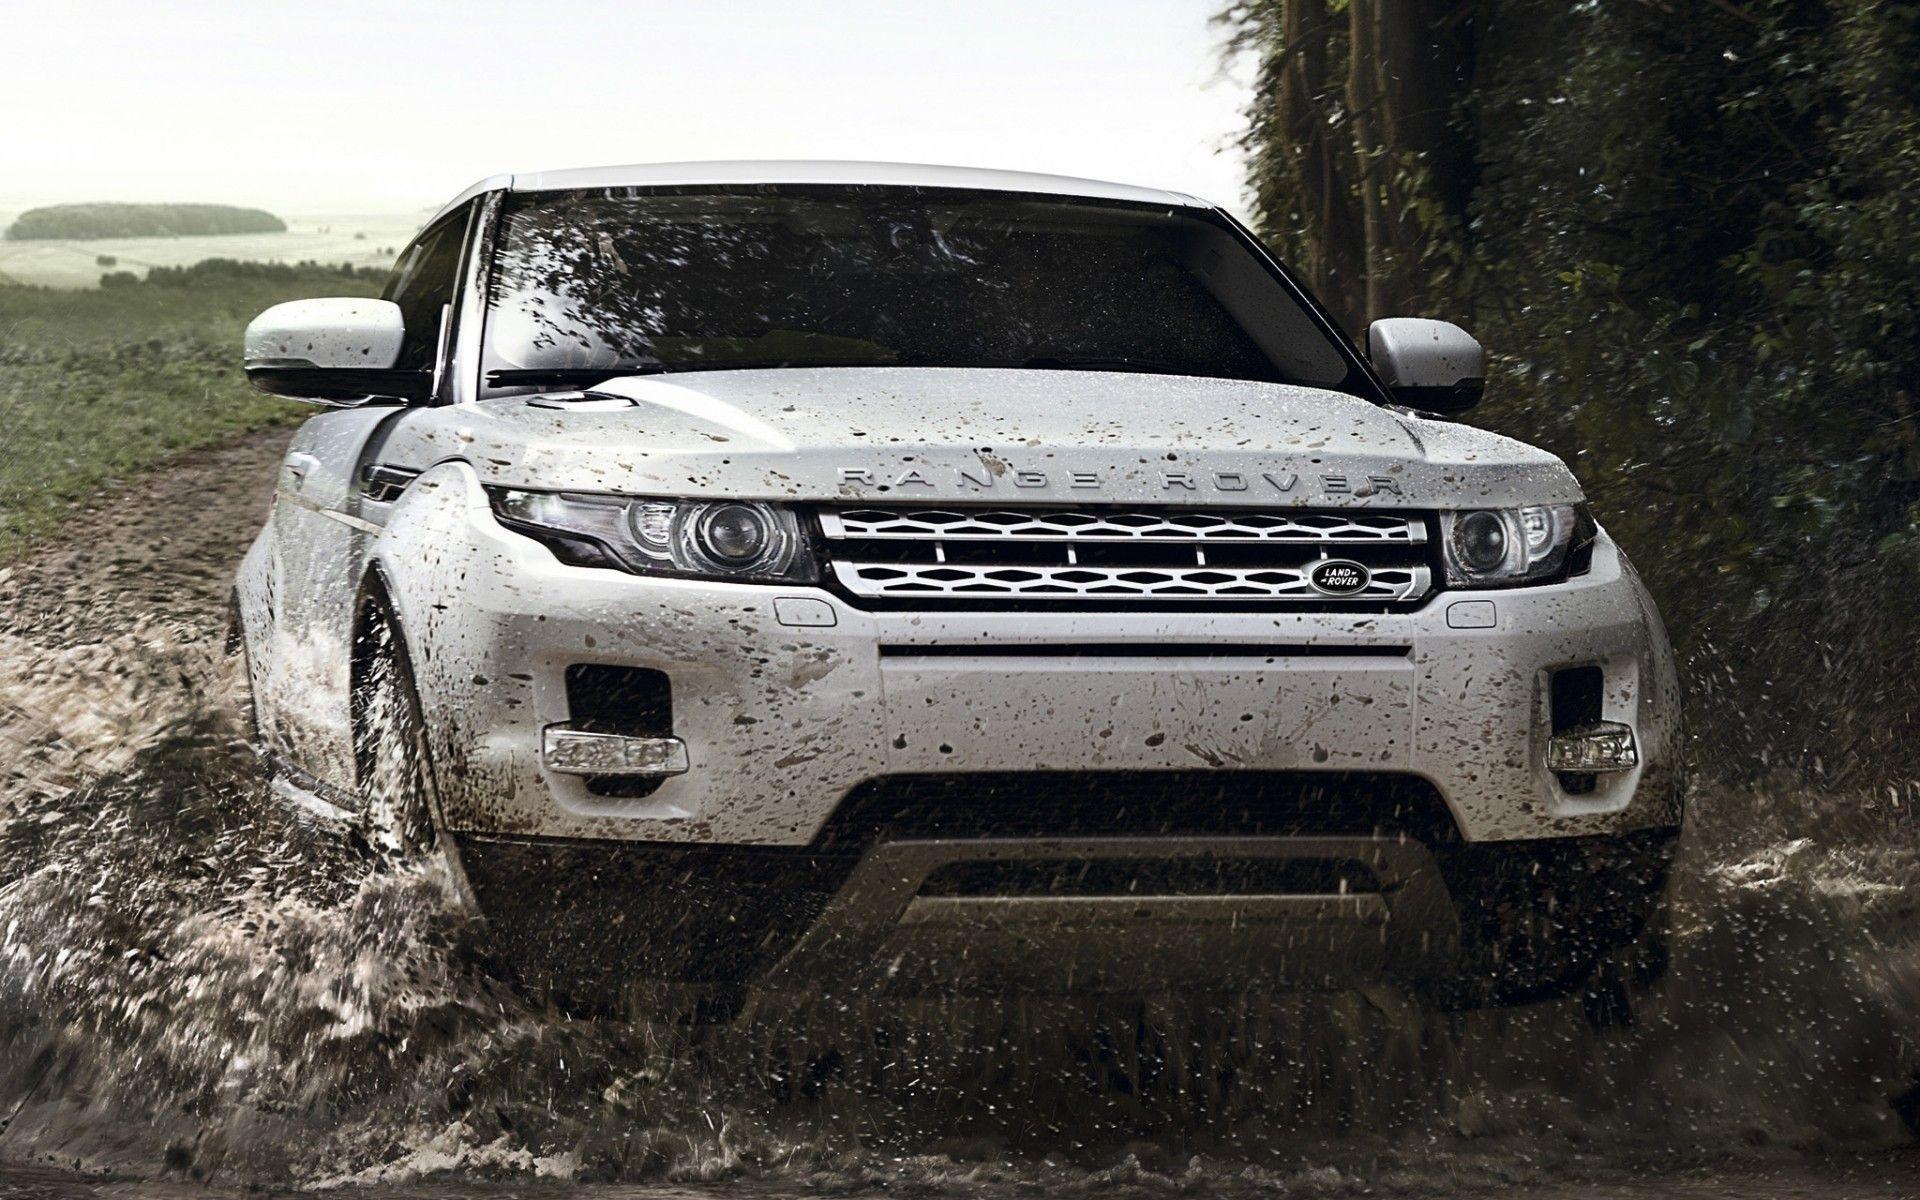 Land Rover Wallpaper Top Background